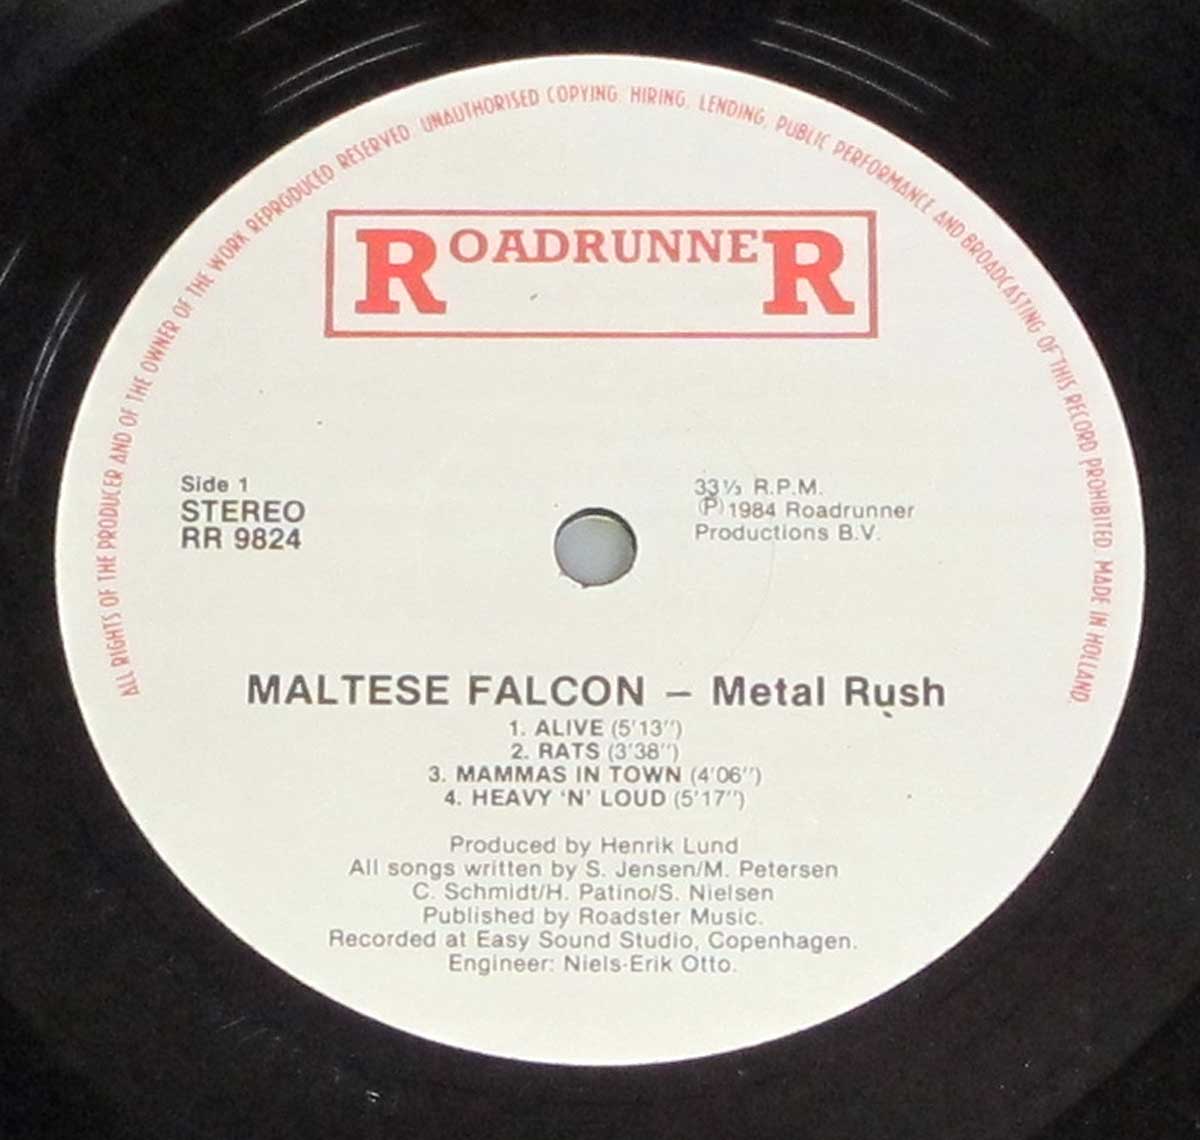 Enlarged High Resolution Photo of the Record's label MALTESE FALCON - Metal Rush https://vinyl-records.nl